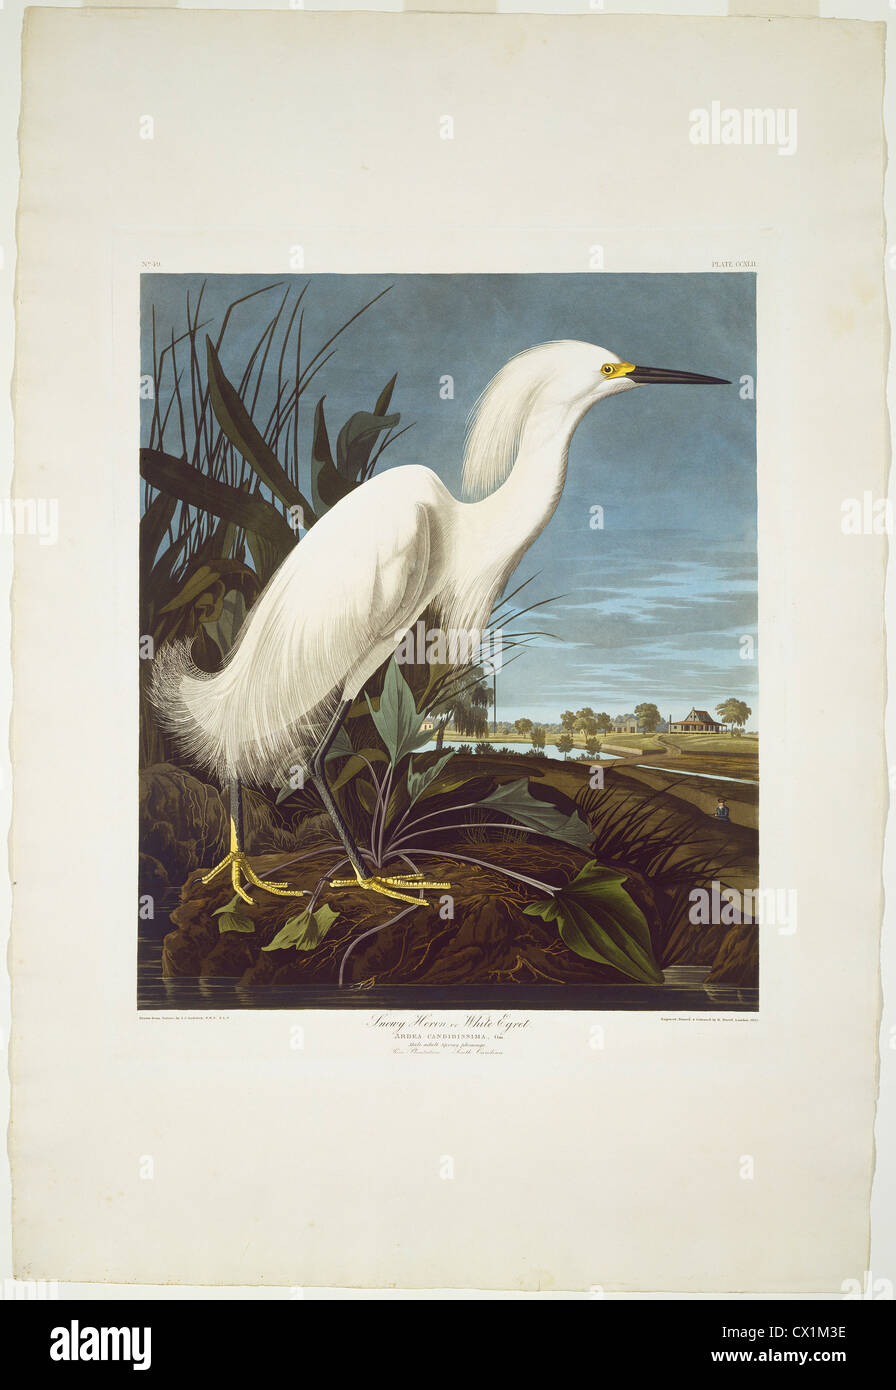 Robert Havell after John James Audubon, Snowy Heron, or White Egret, American, 1793 - 1878, 1835, hand-colored etching and aquat Stock Photo